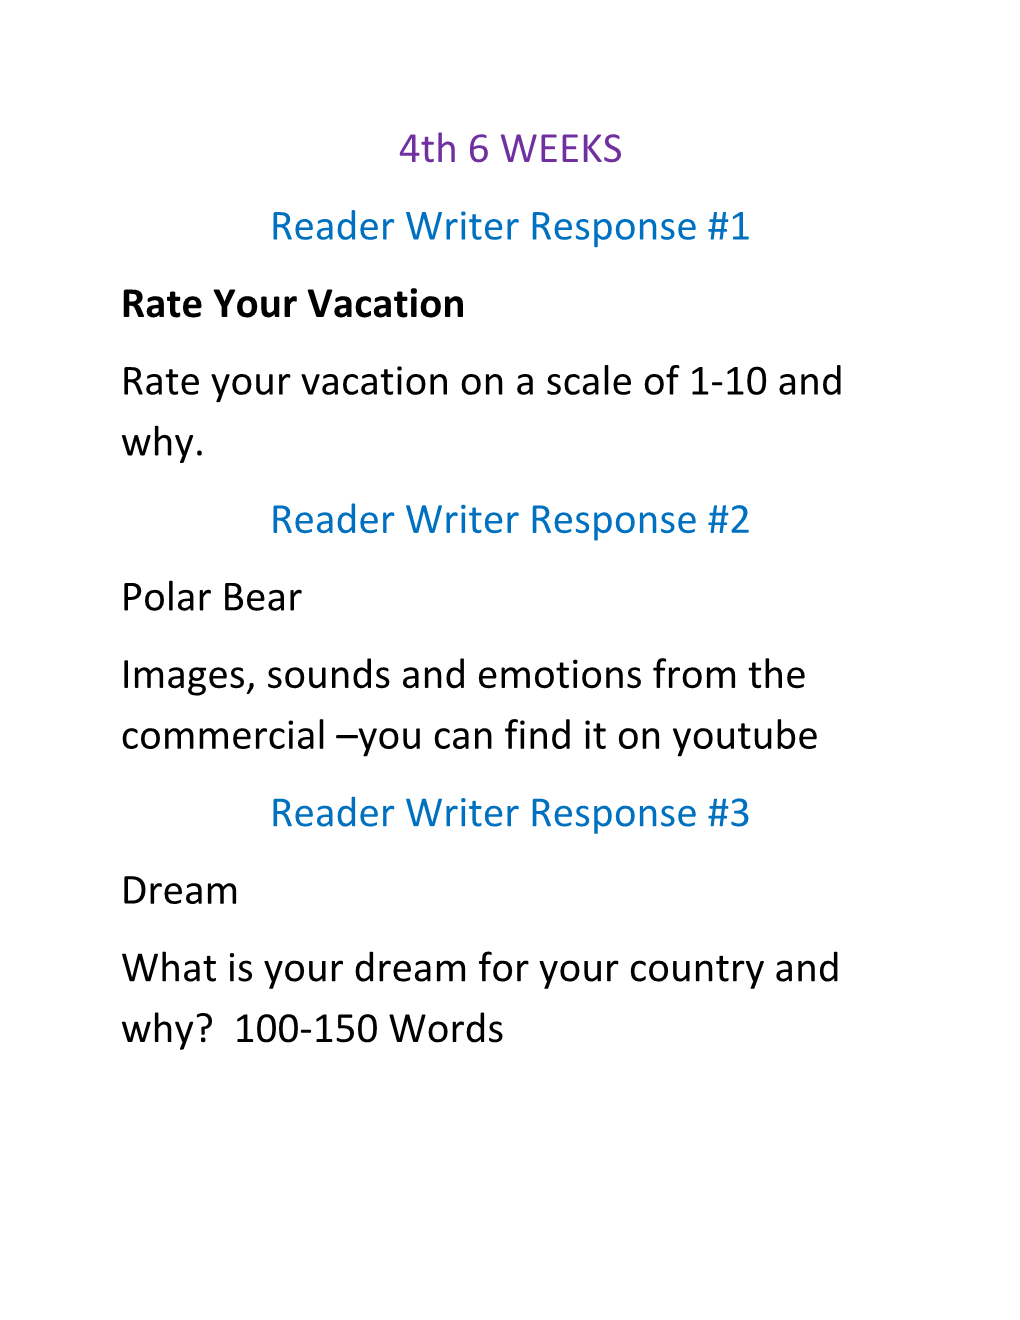 Rate Your Vacation